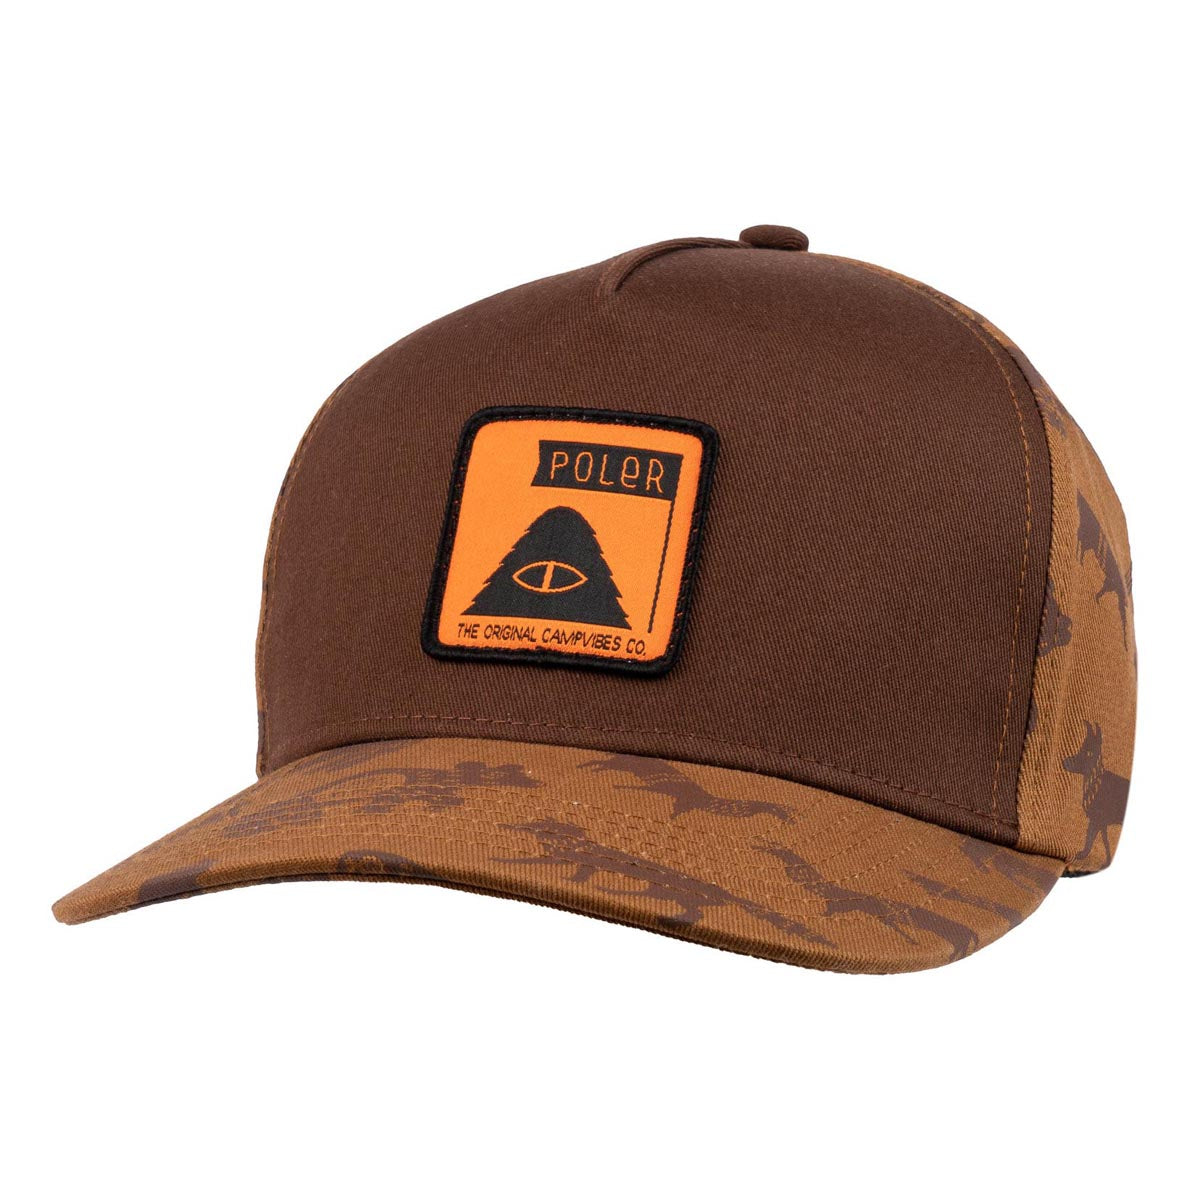 Poler Print Patch Hat - Critter Brown image 1